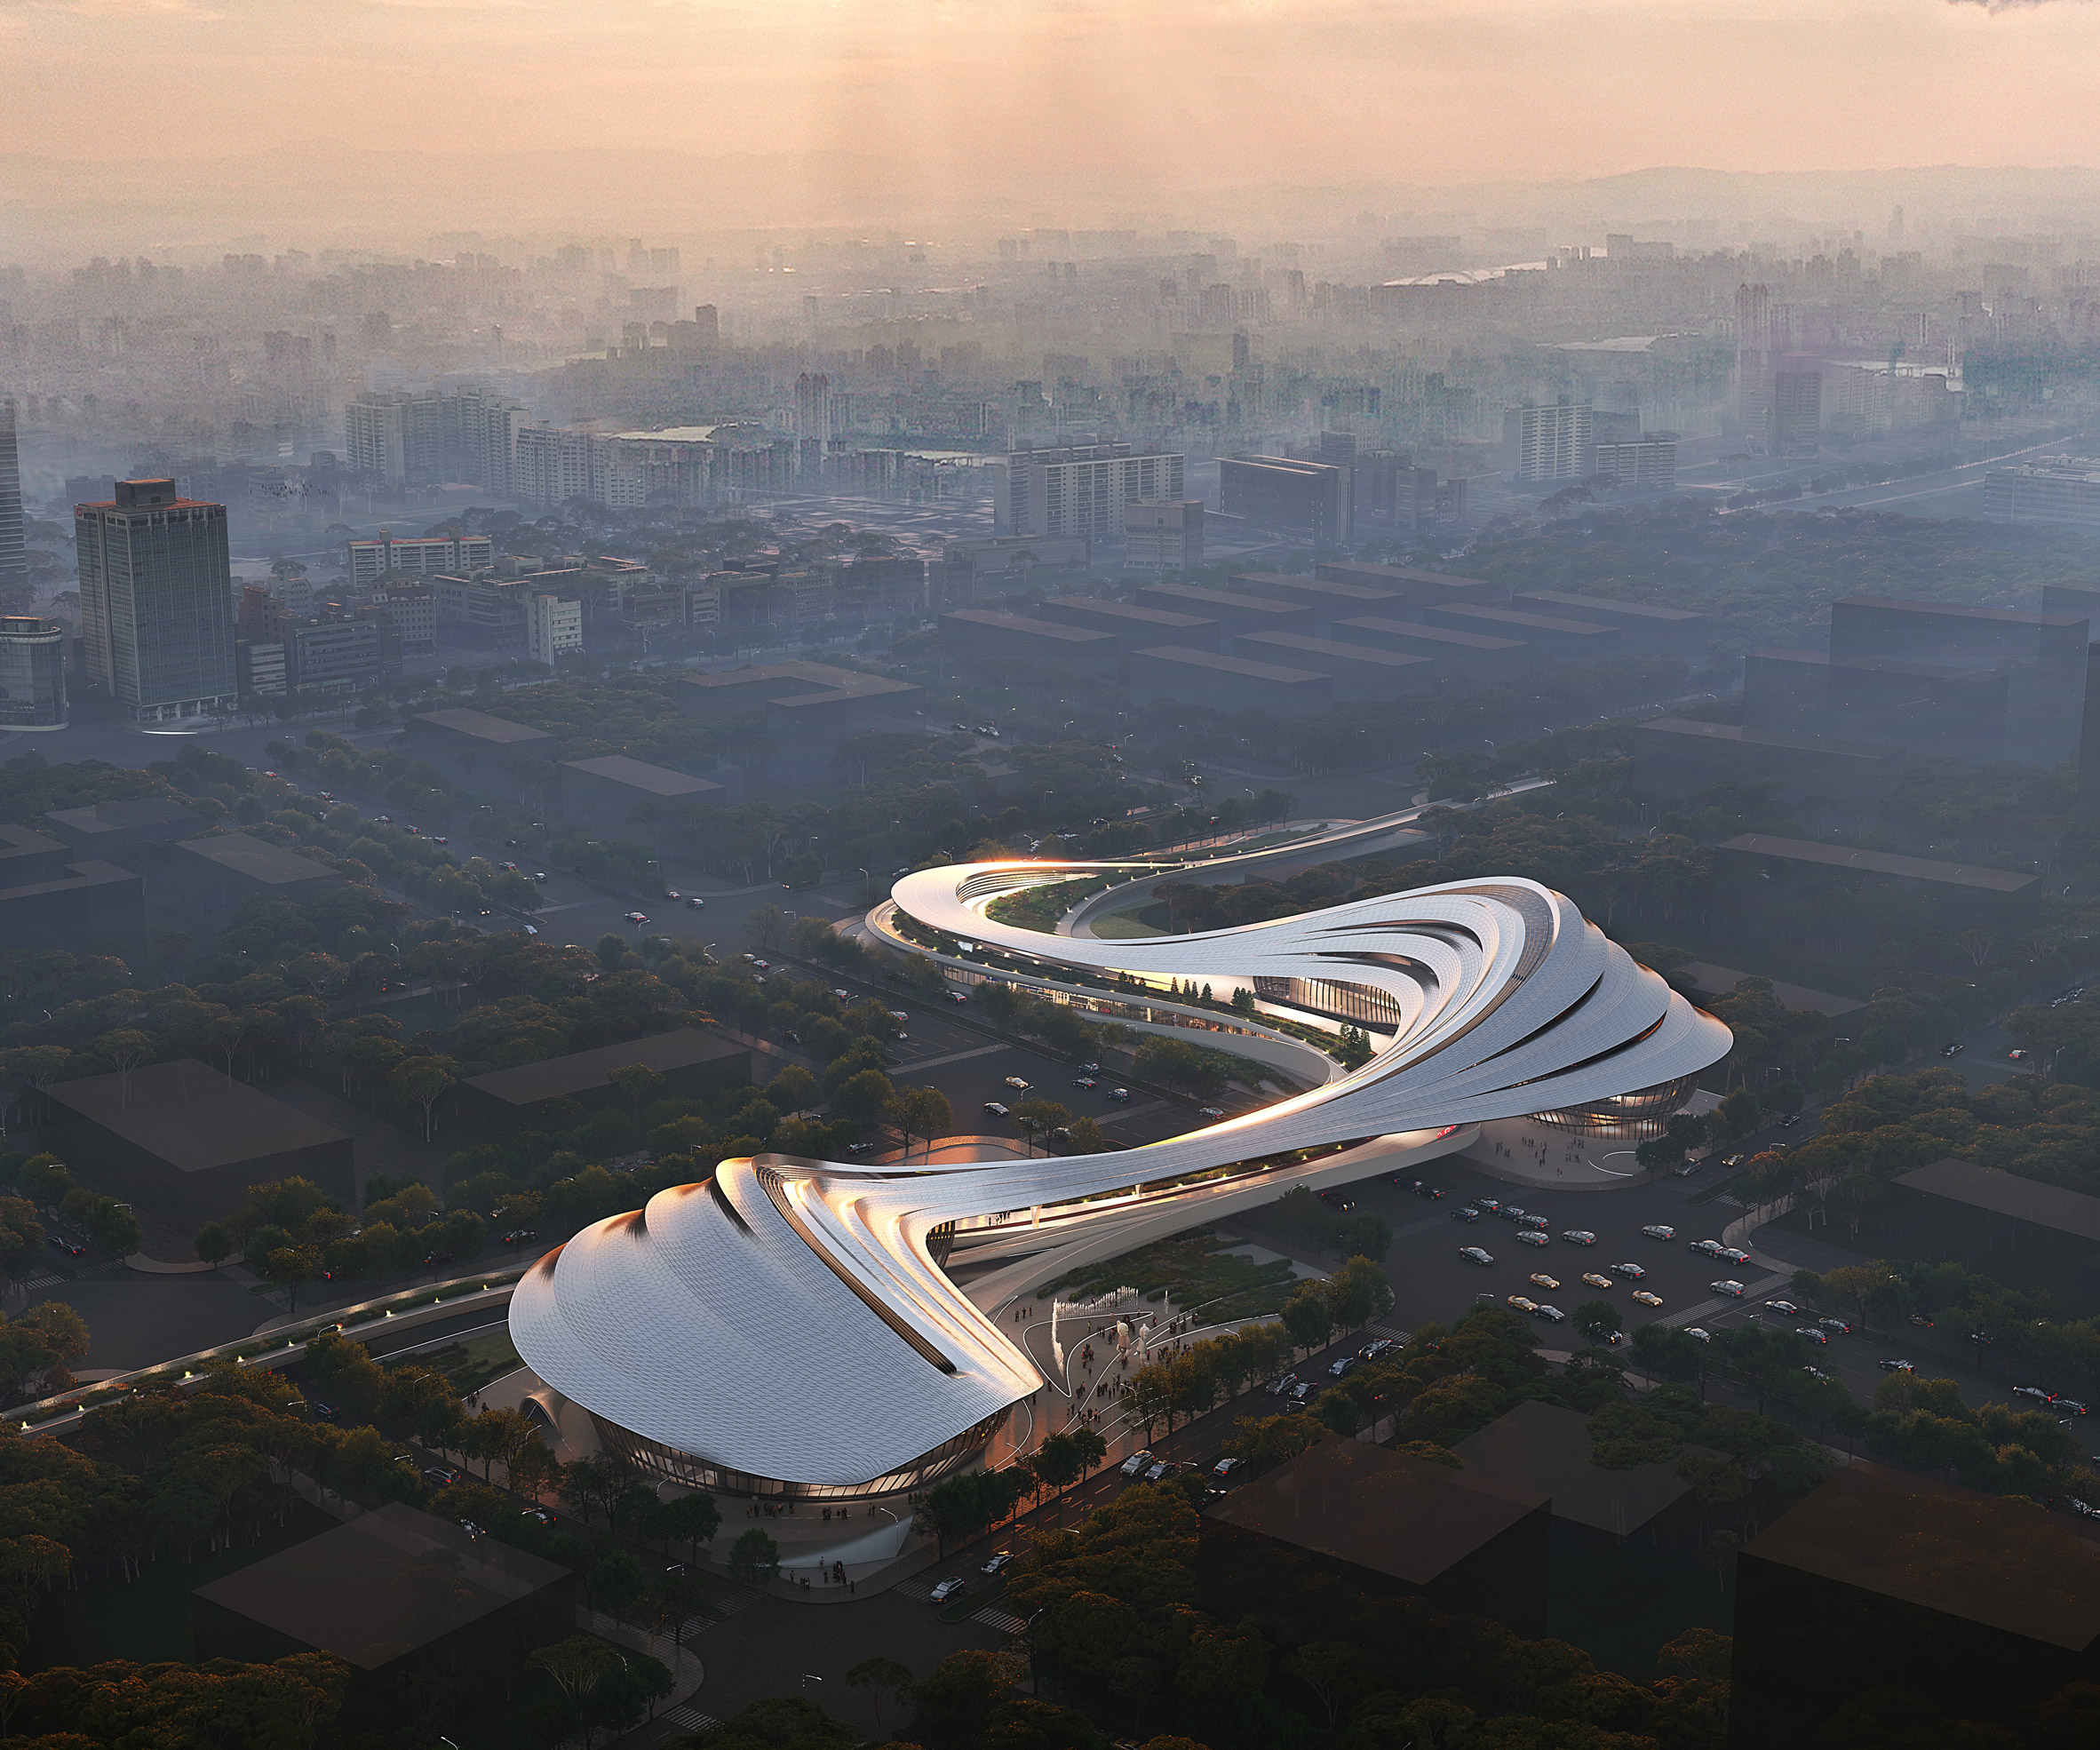 Visual of Jinghe New City Culture & Art Centre in China